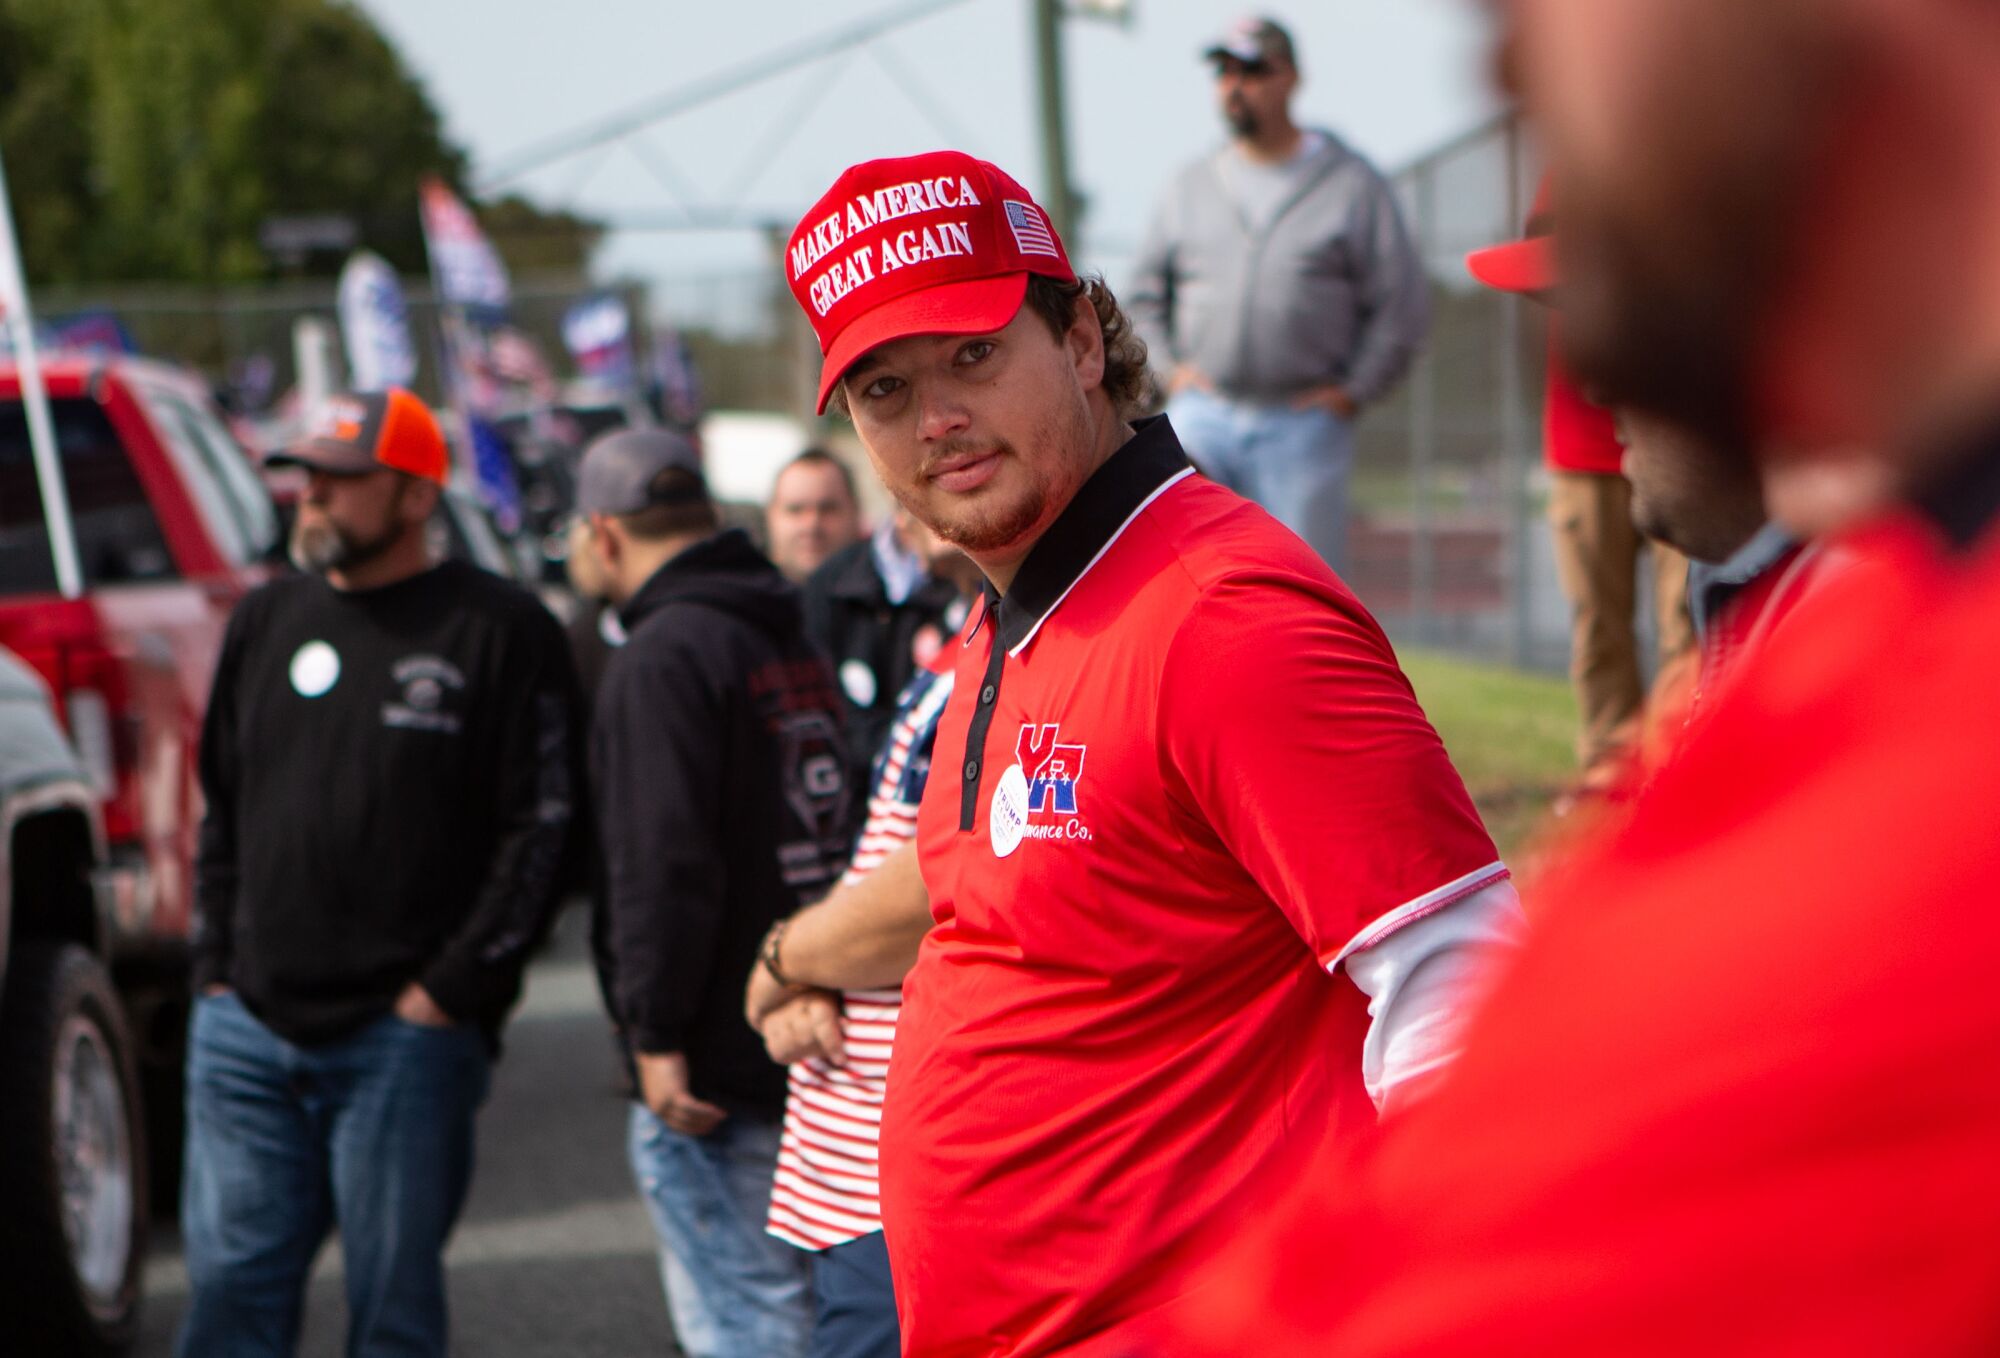 T.L. Mann, president of The Alamance Young Republicans, along with hundreds of Trump supporters